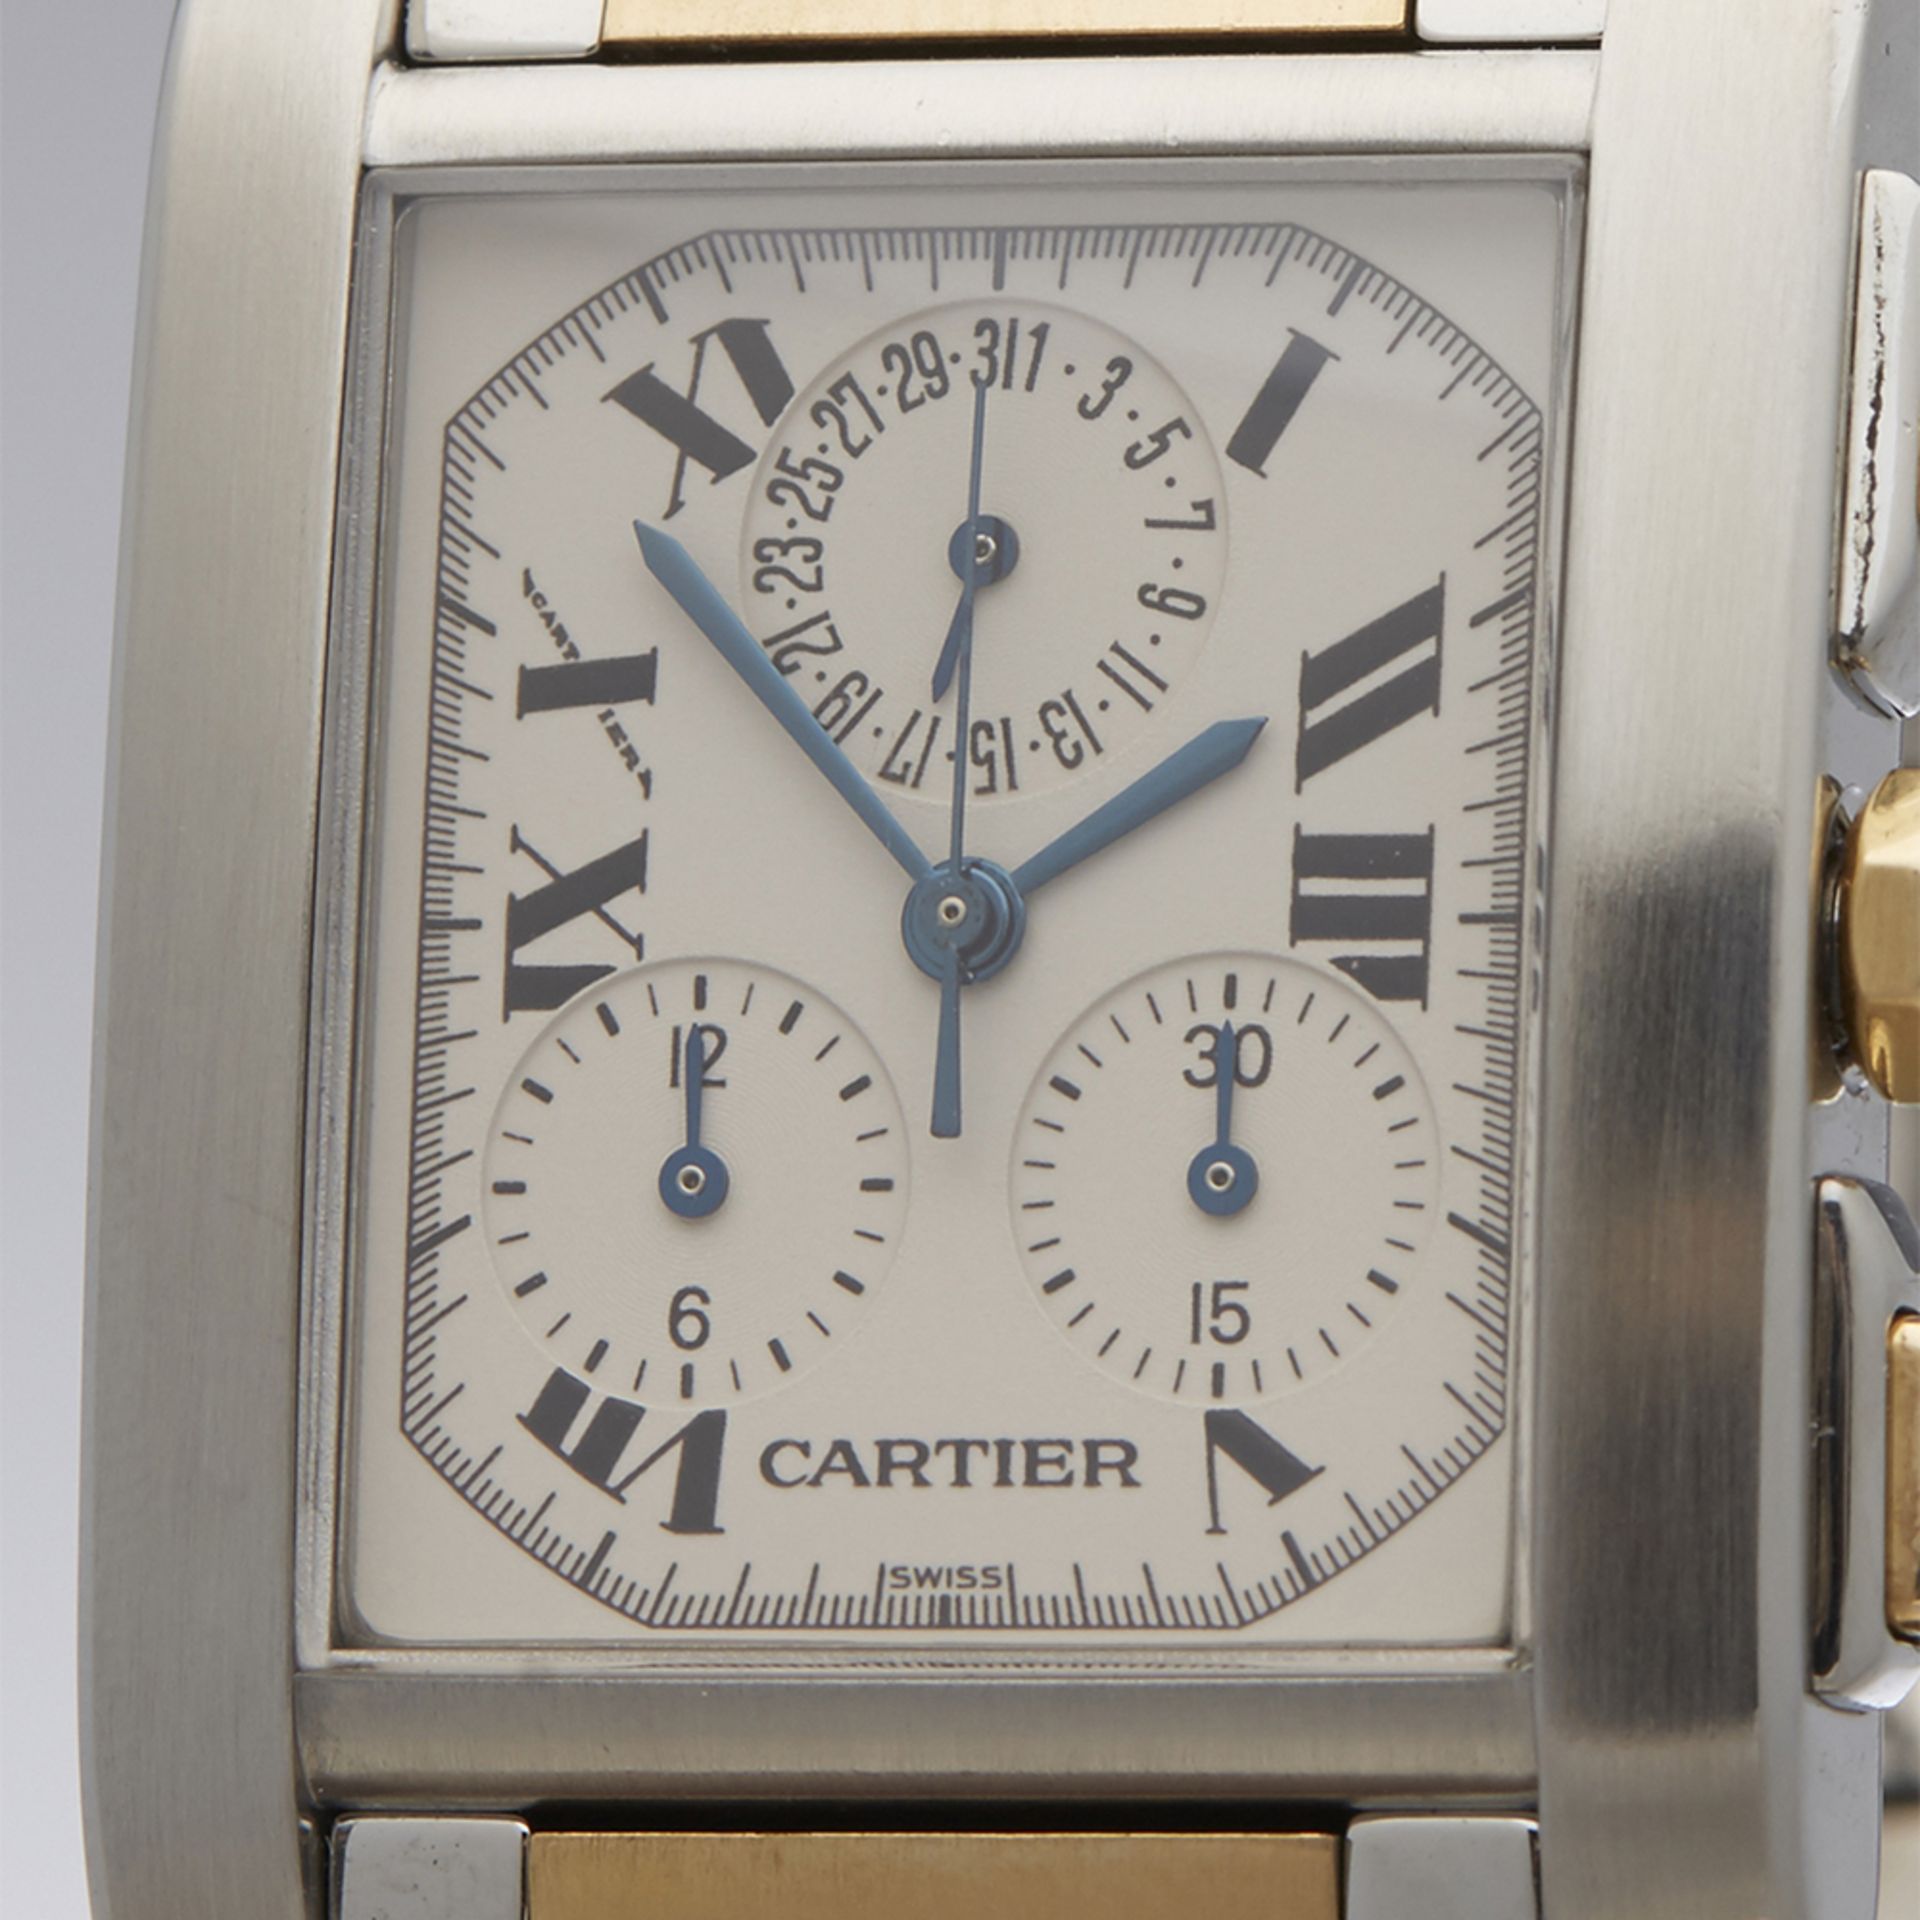 Cartier, Tank Francaise Chronoreflex 28mm Stainless Steel & 18k Yellow Gold 2303 or W51004Q4